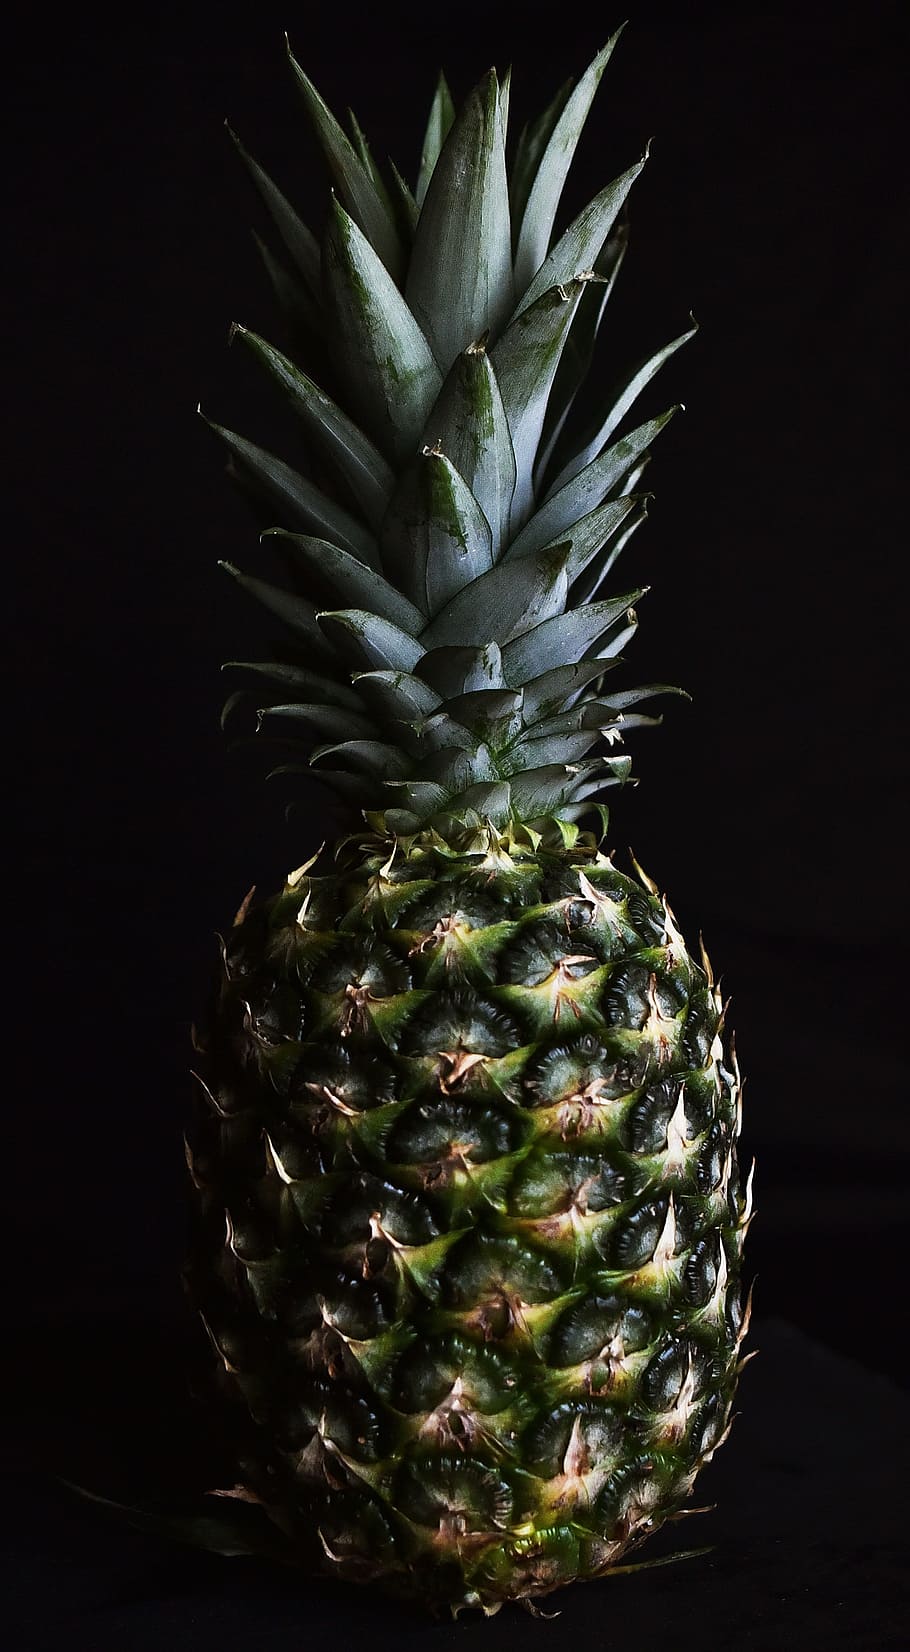 pineapple, fruit, fetus, still life, healthy eating, tropical fruit, food and drink, food, wellbeing, freshness